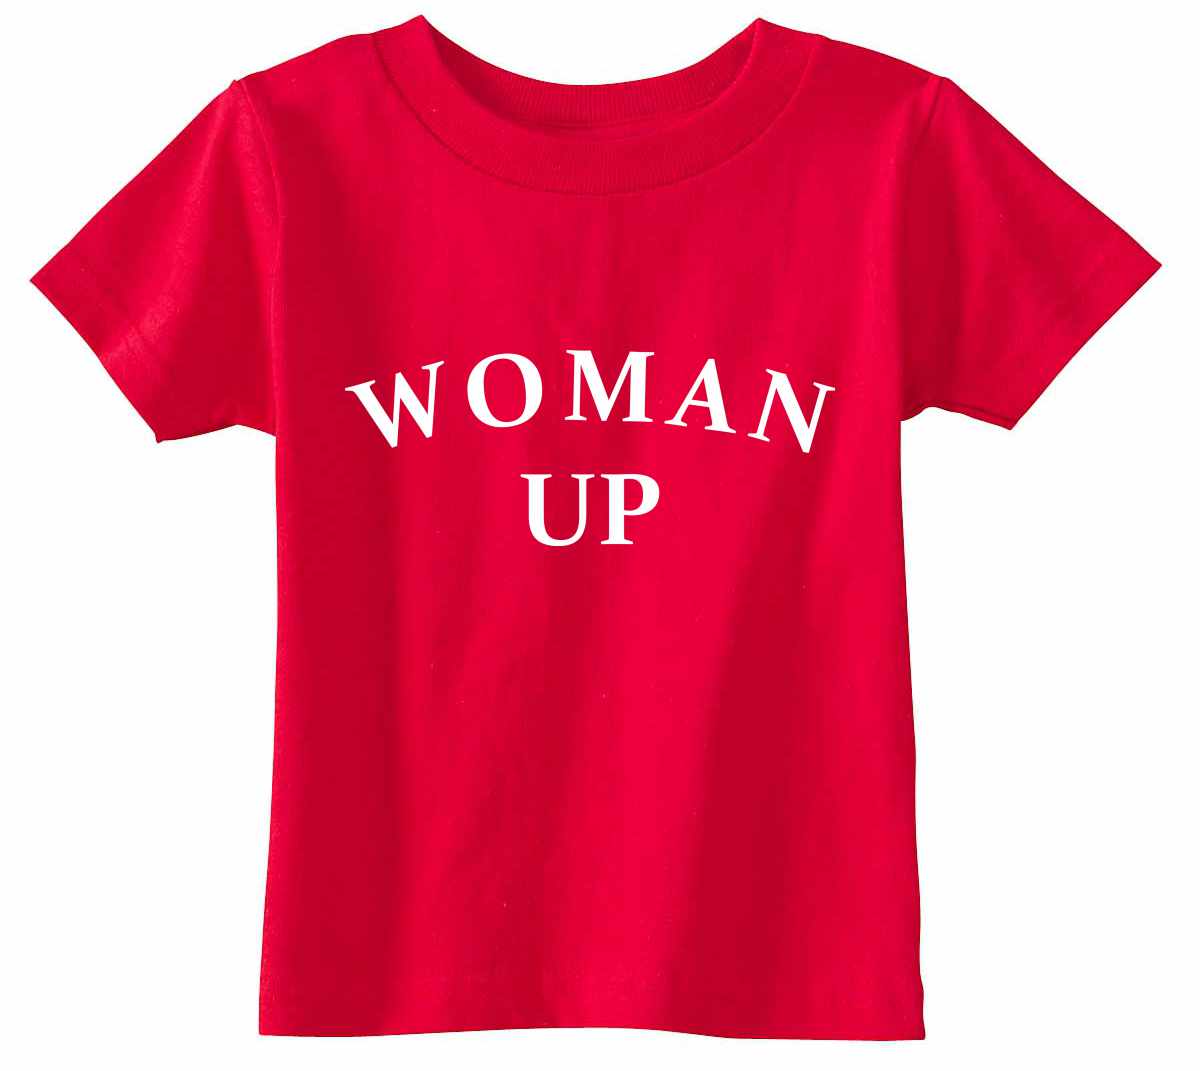 Woman Up on Infant-Toddler T-Shirt (#1010-7)